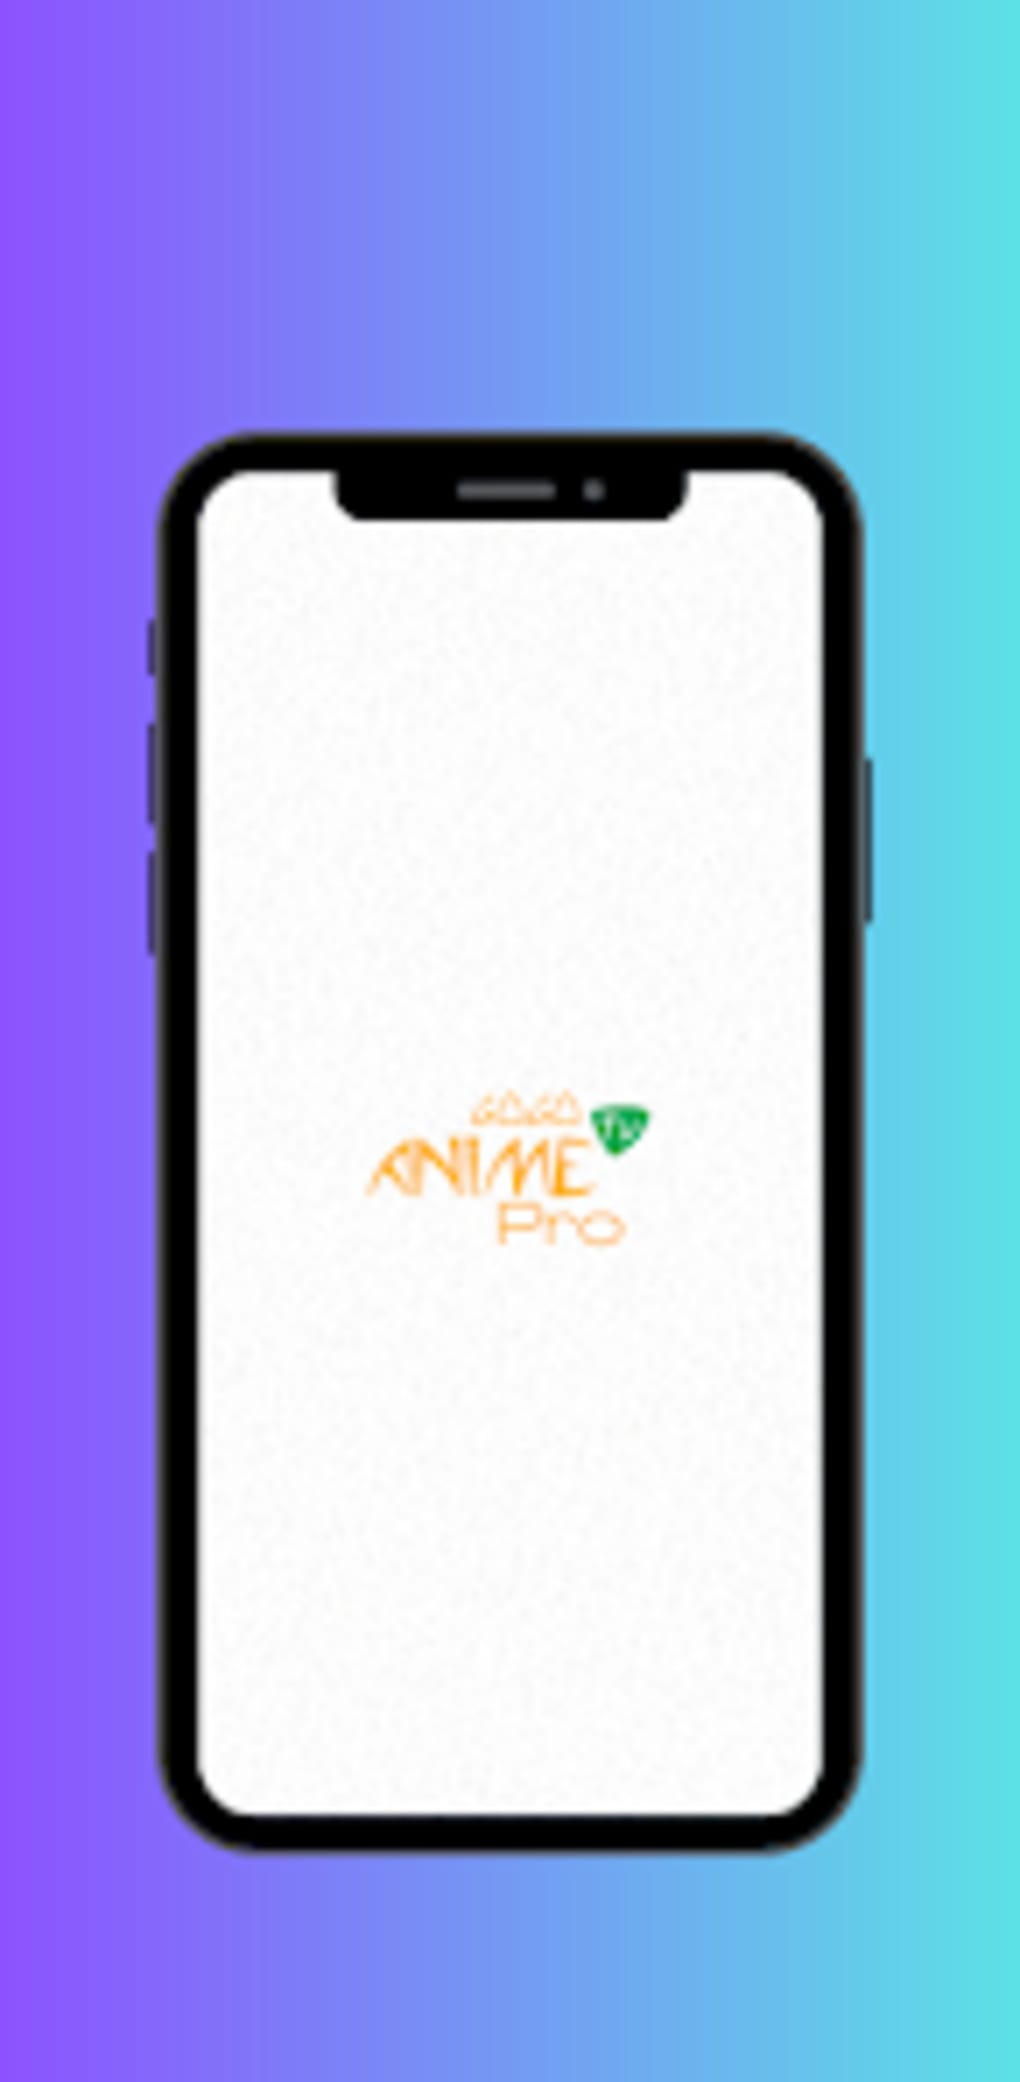 Anime Fanz Tube APK v3.2.6 Download for Android 2023